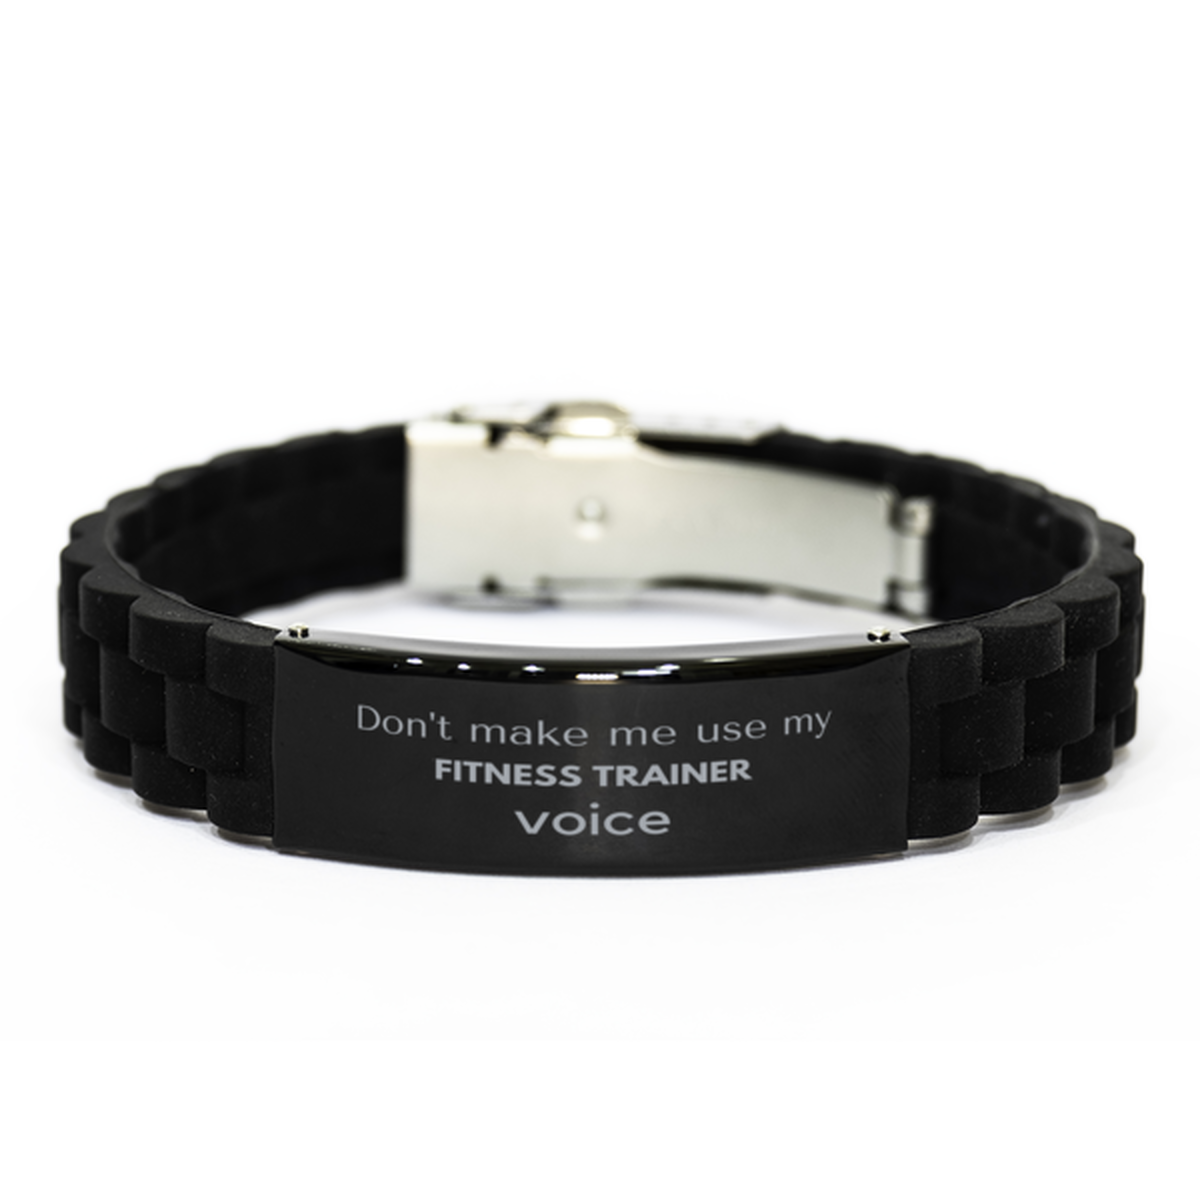 Don't make me use my Fitness Trainer voice, Sarcasm Fitness Trainer Gifts, Christmas Fitness Trainer Black Glidelock Clasp Bracelet Birthday Unique Gifts For Fitness Trainer Coworkers, Men, Women, Colleague, Friends